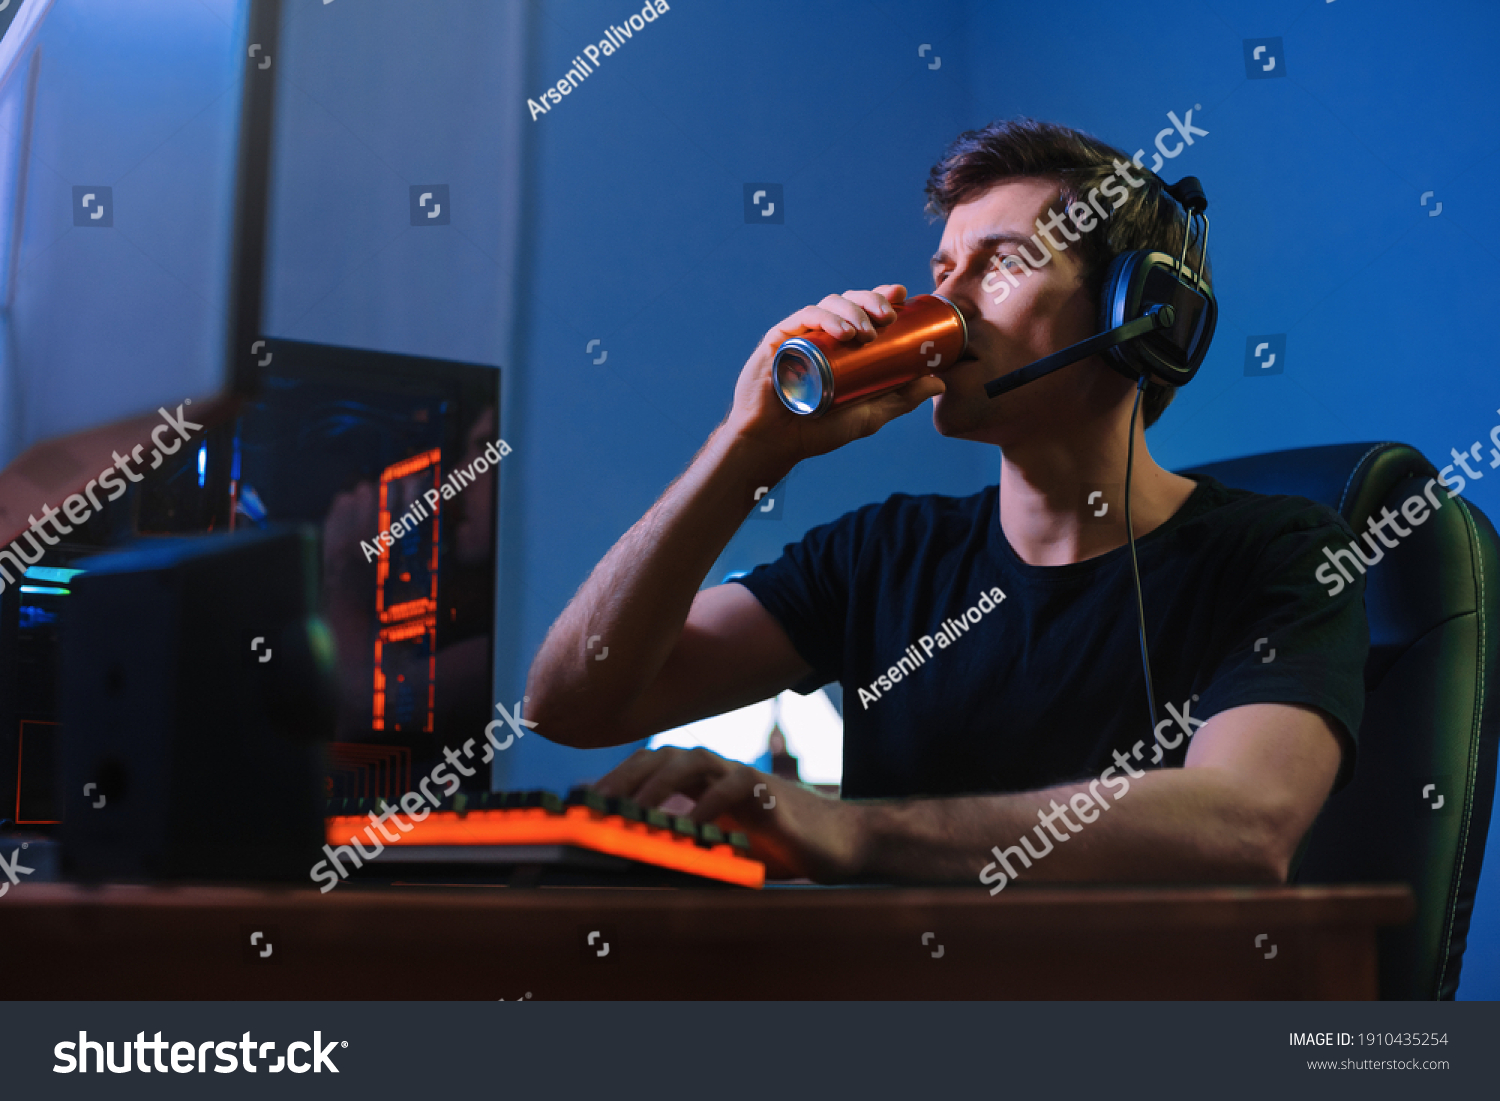 Cyber sport. Professional cybersport player training or playing online video game on his PC late at night, drinking caffeine energy drink to concentrate, focus on game. Team play. Games addiction #1910435254